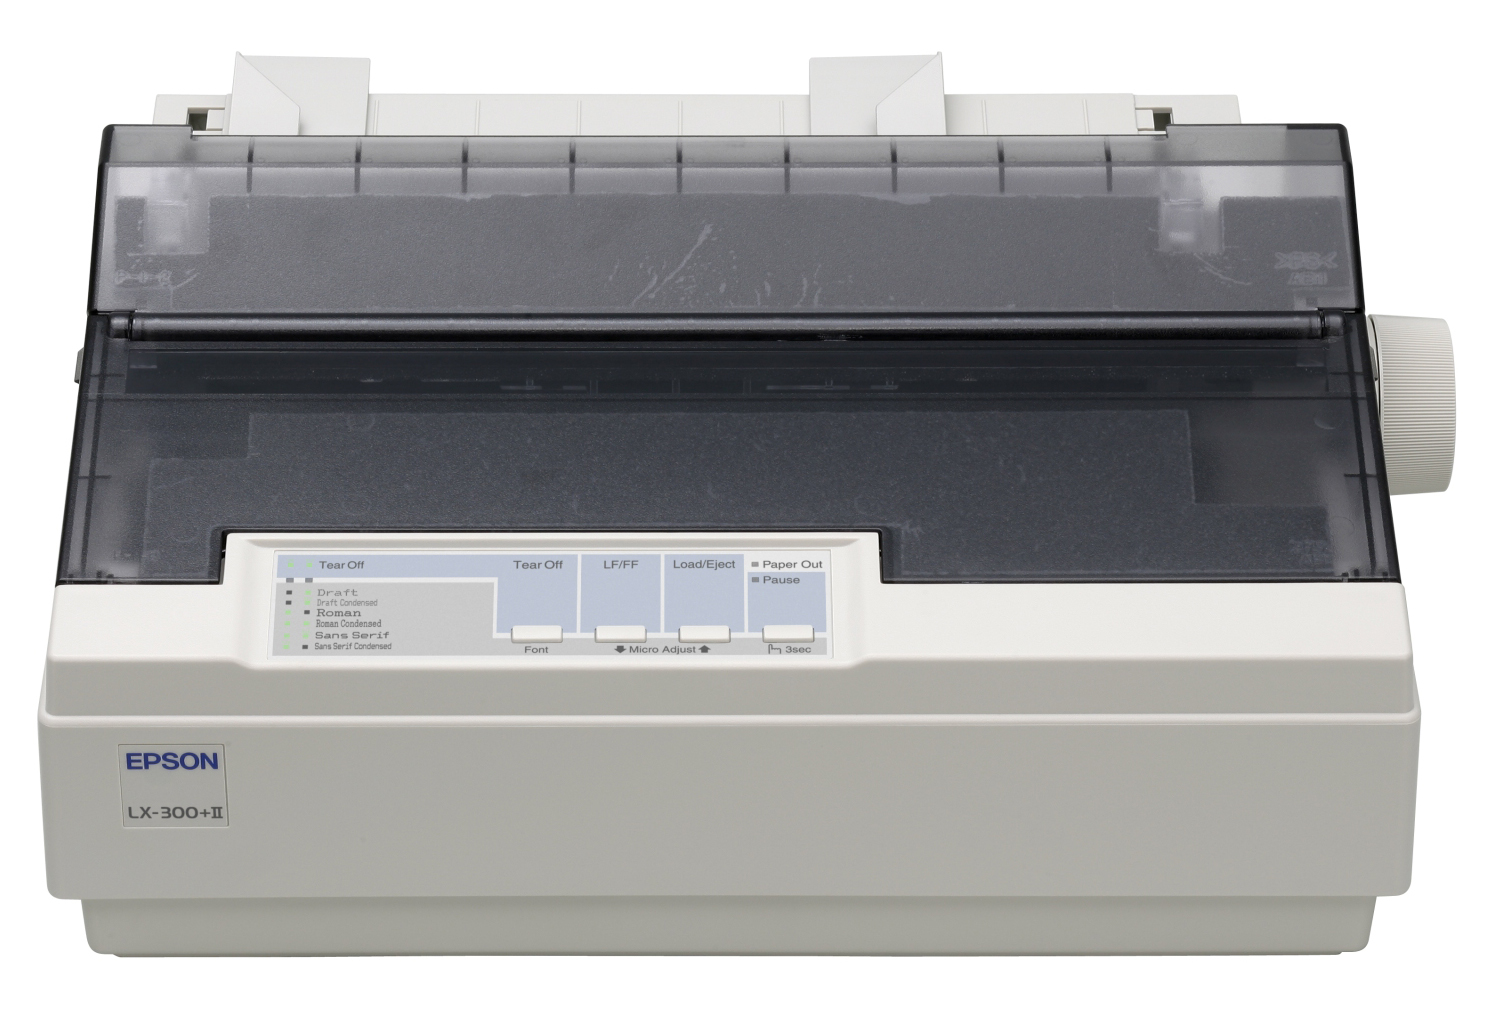 Software Free Download: Download Epson Lx 300 &amp; LX-300+ II ...